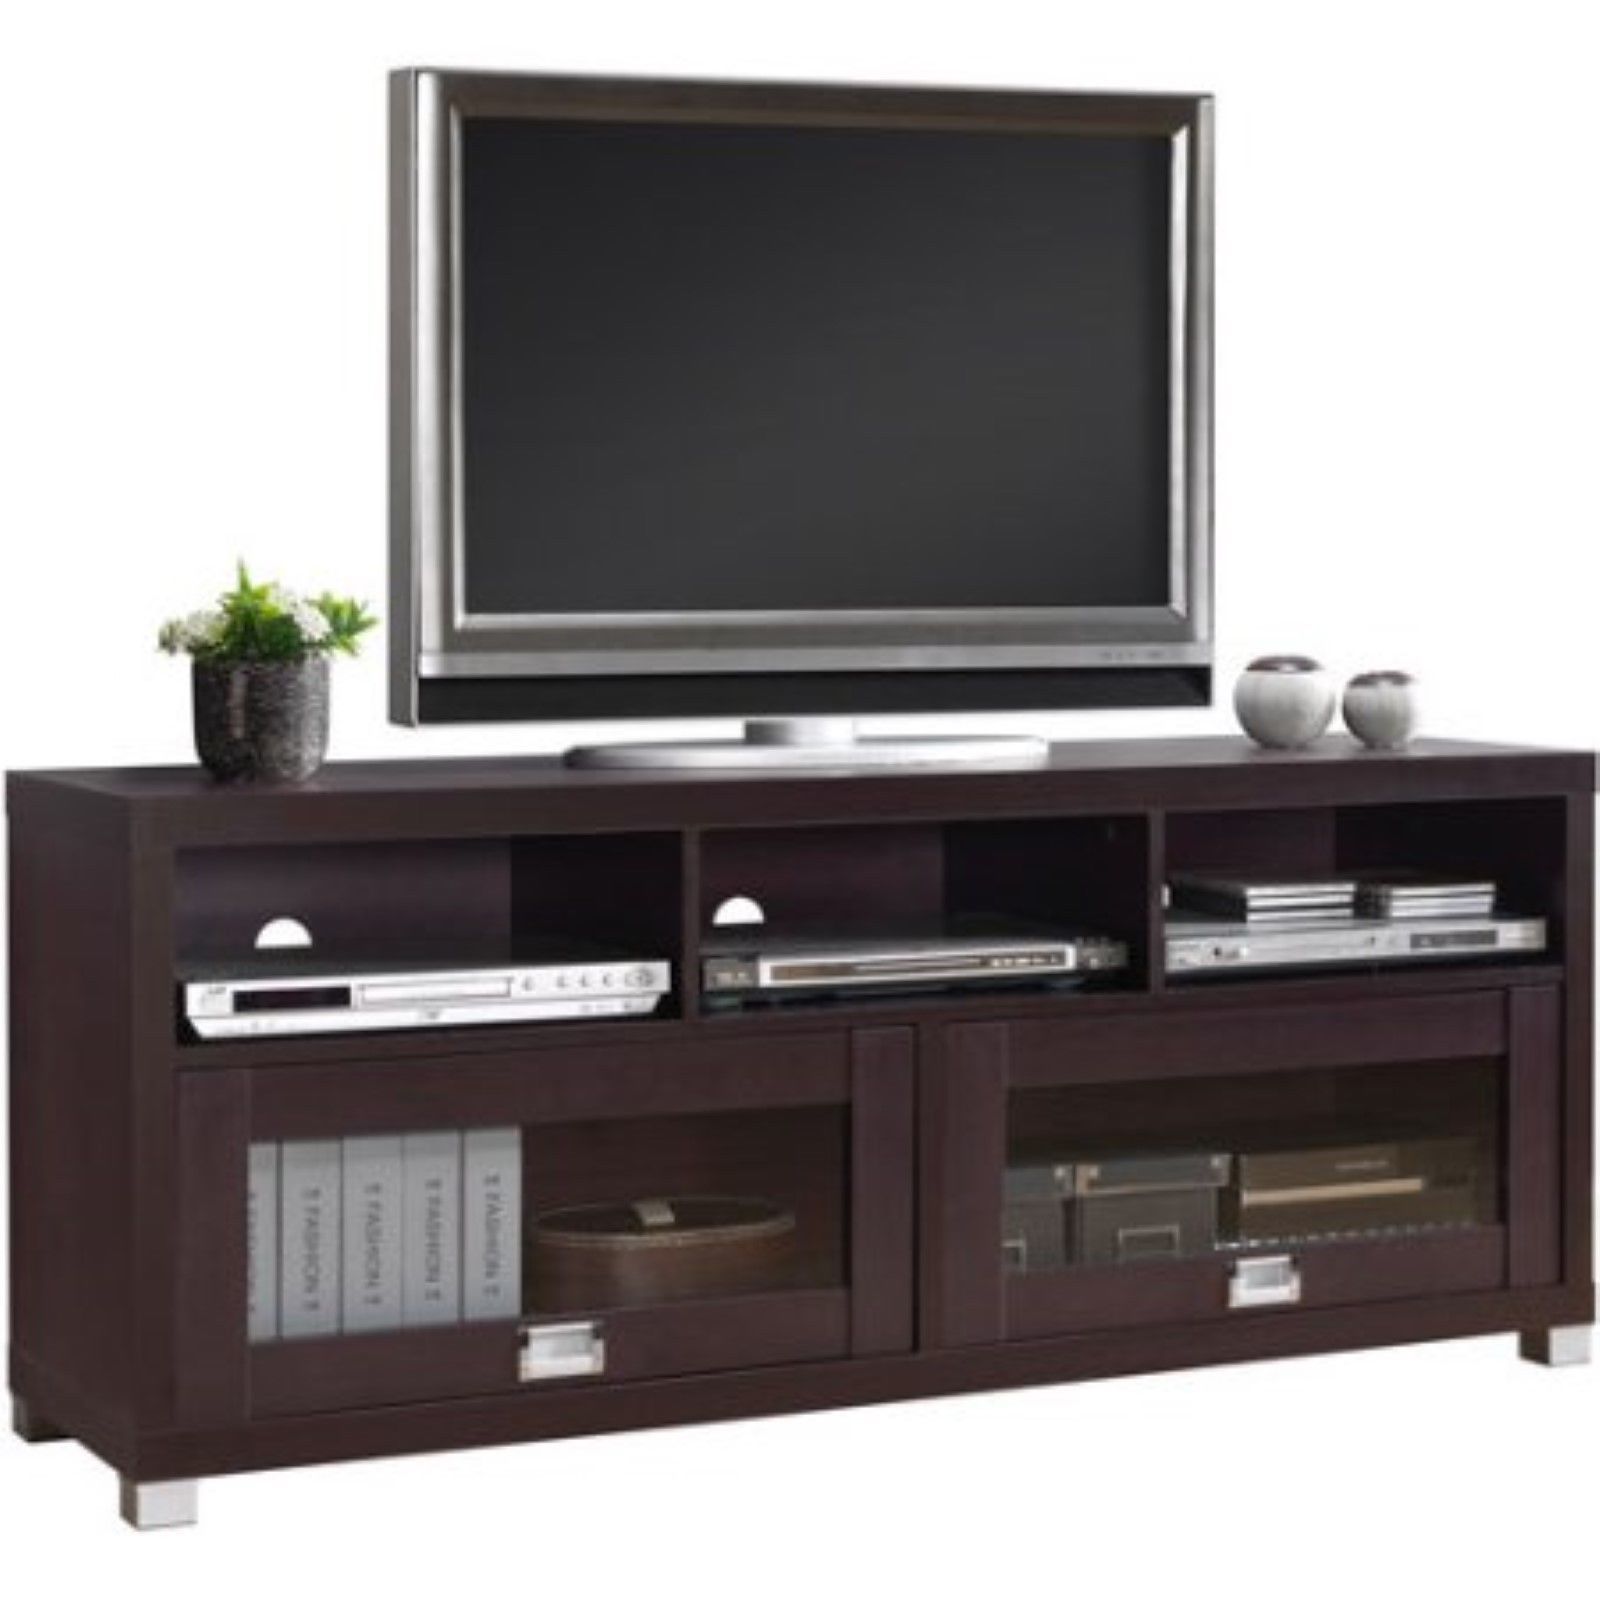 Tv Stand 65 Inch Flat Screen Home Furniture Entertainment For Modern Tv Cabinets For Flat Screens (View 1 of 15)